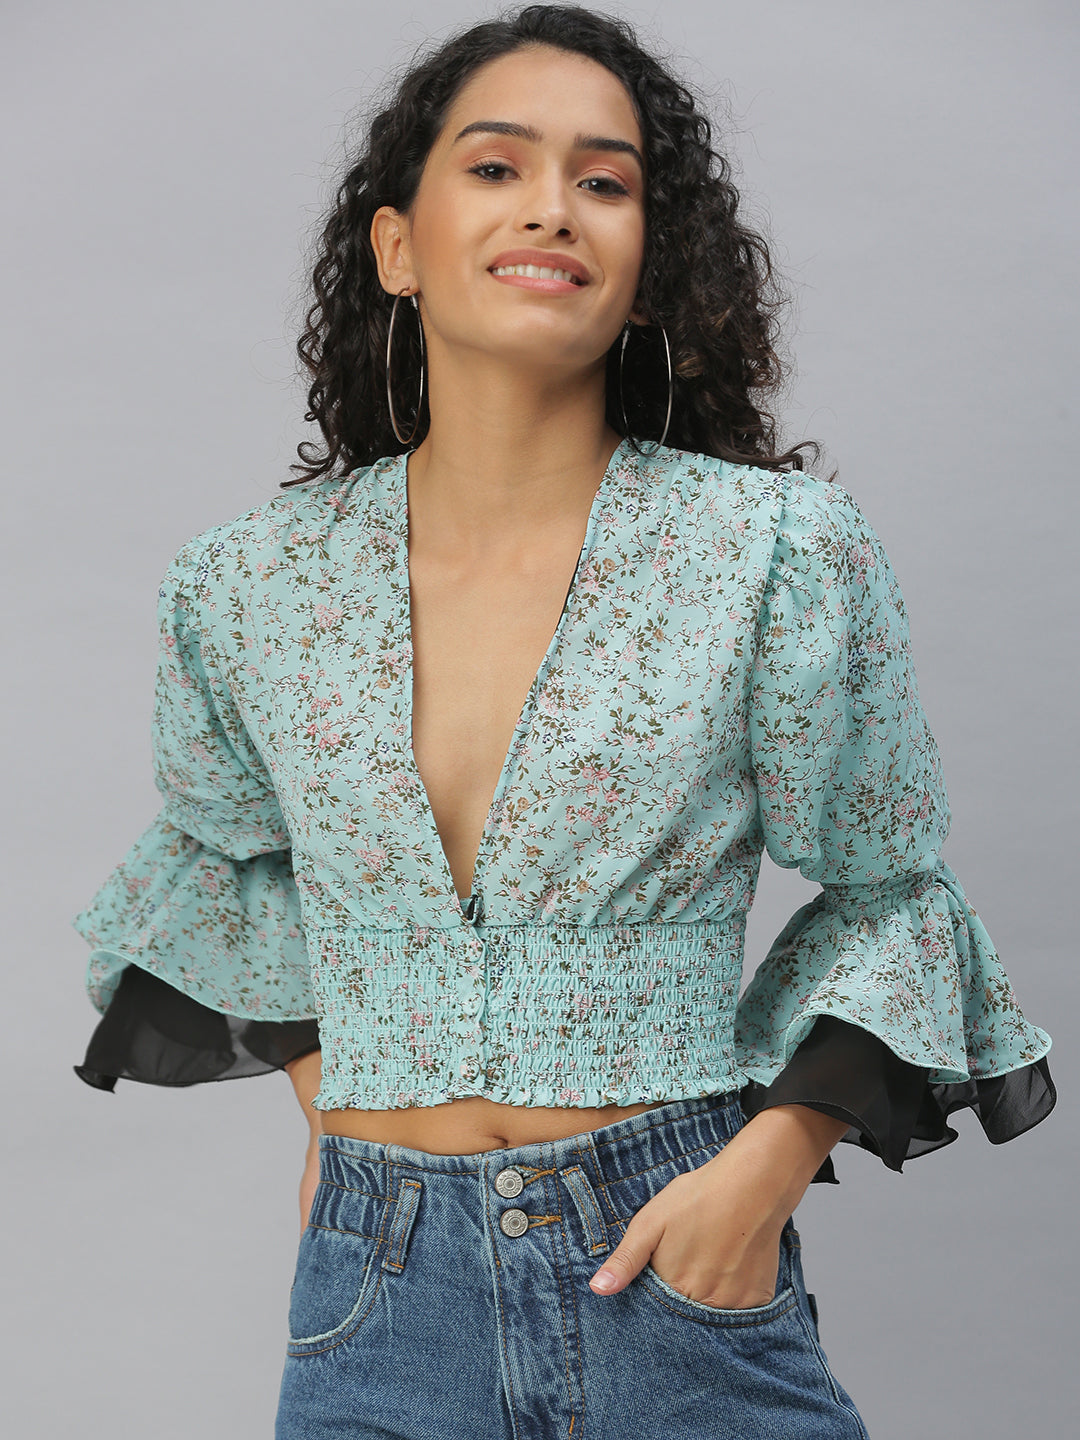 Women's Turquoise Blue Printed Tops